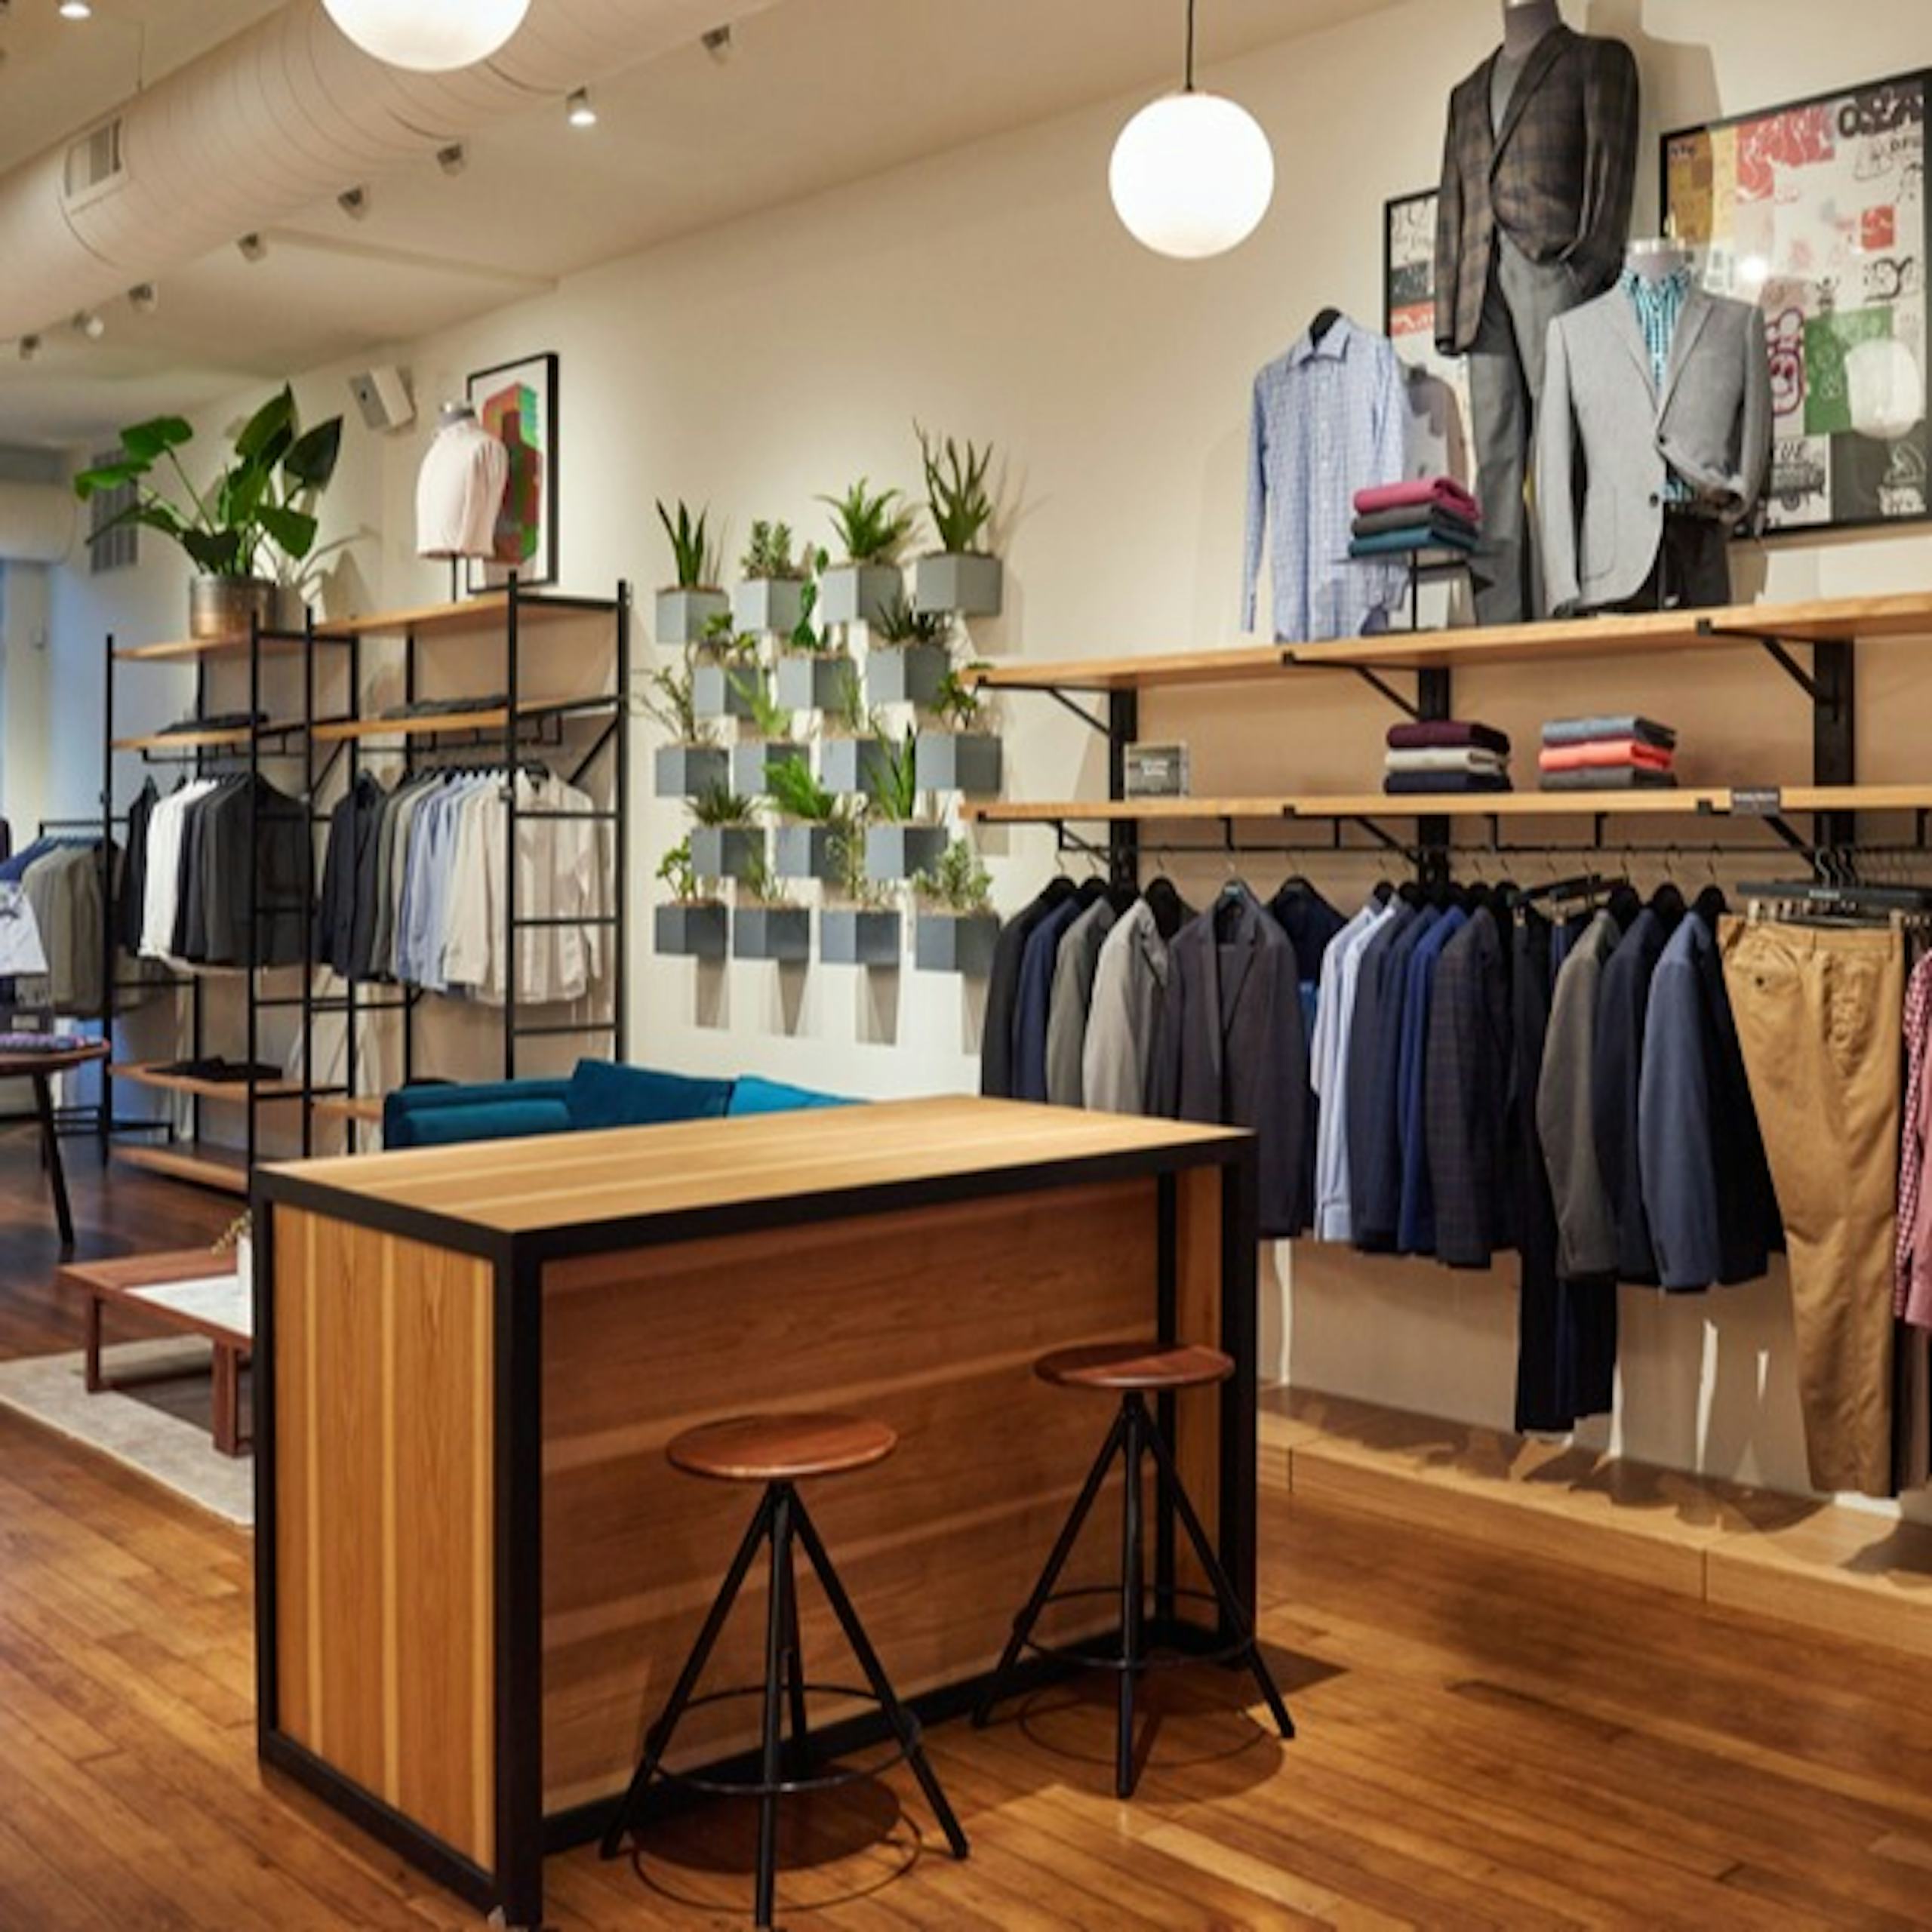 Image of Bonobos Store Display in Cow Hollow, San Francisco. 